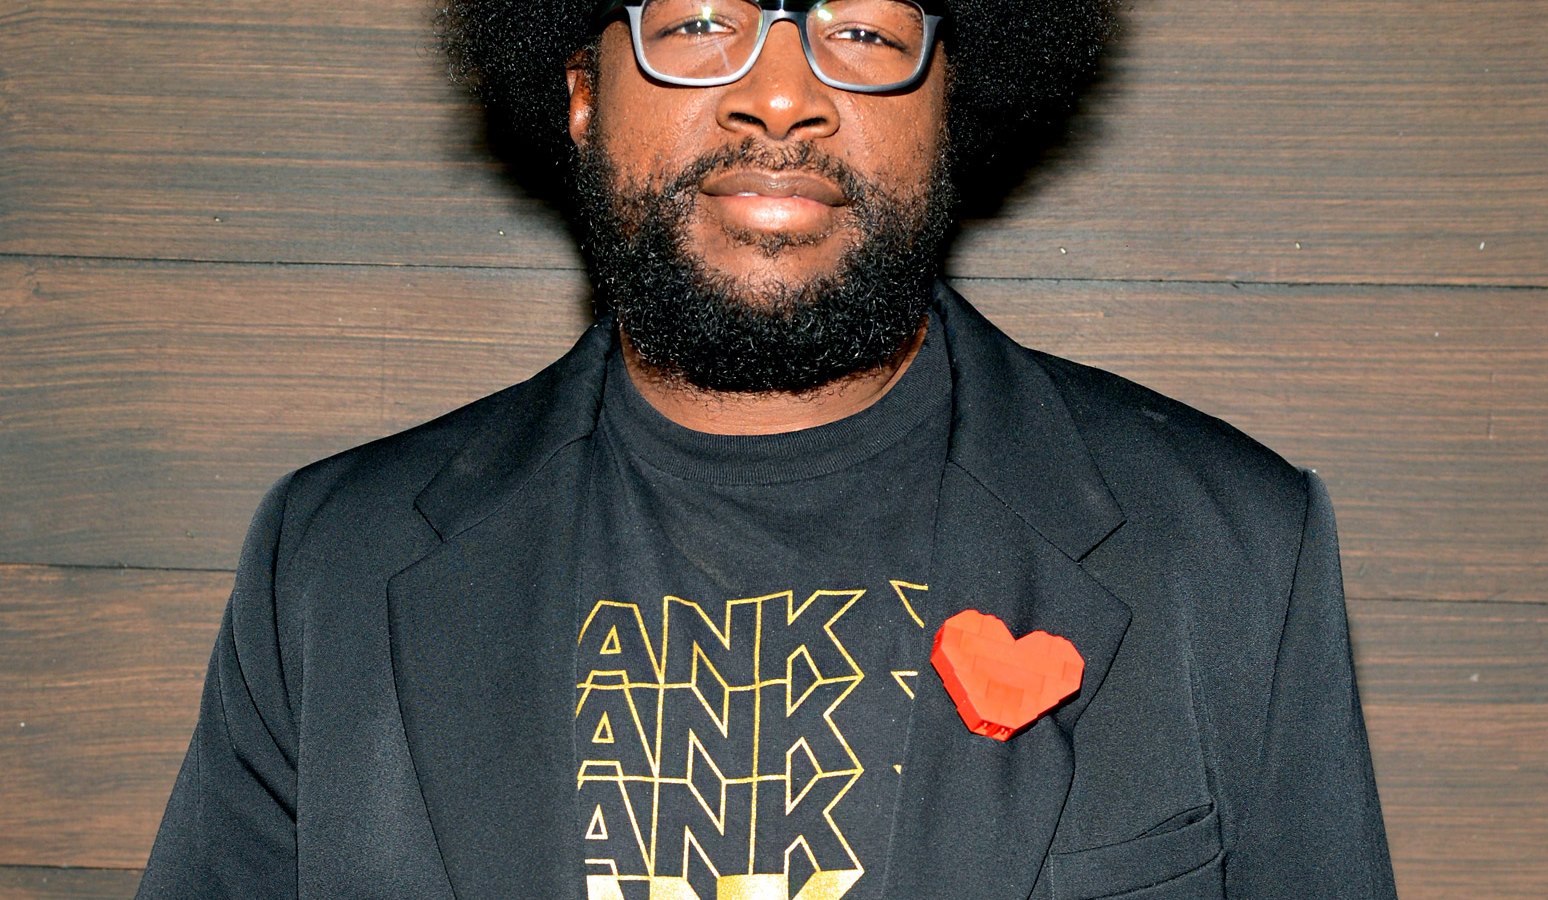 Questlove: 25 Things You Don't Know About Me